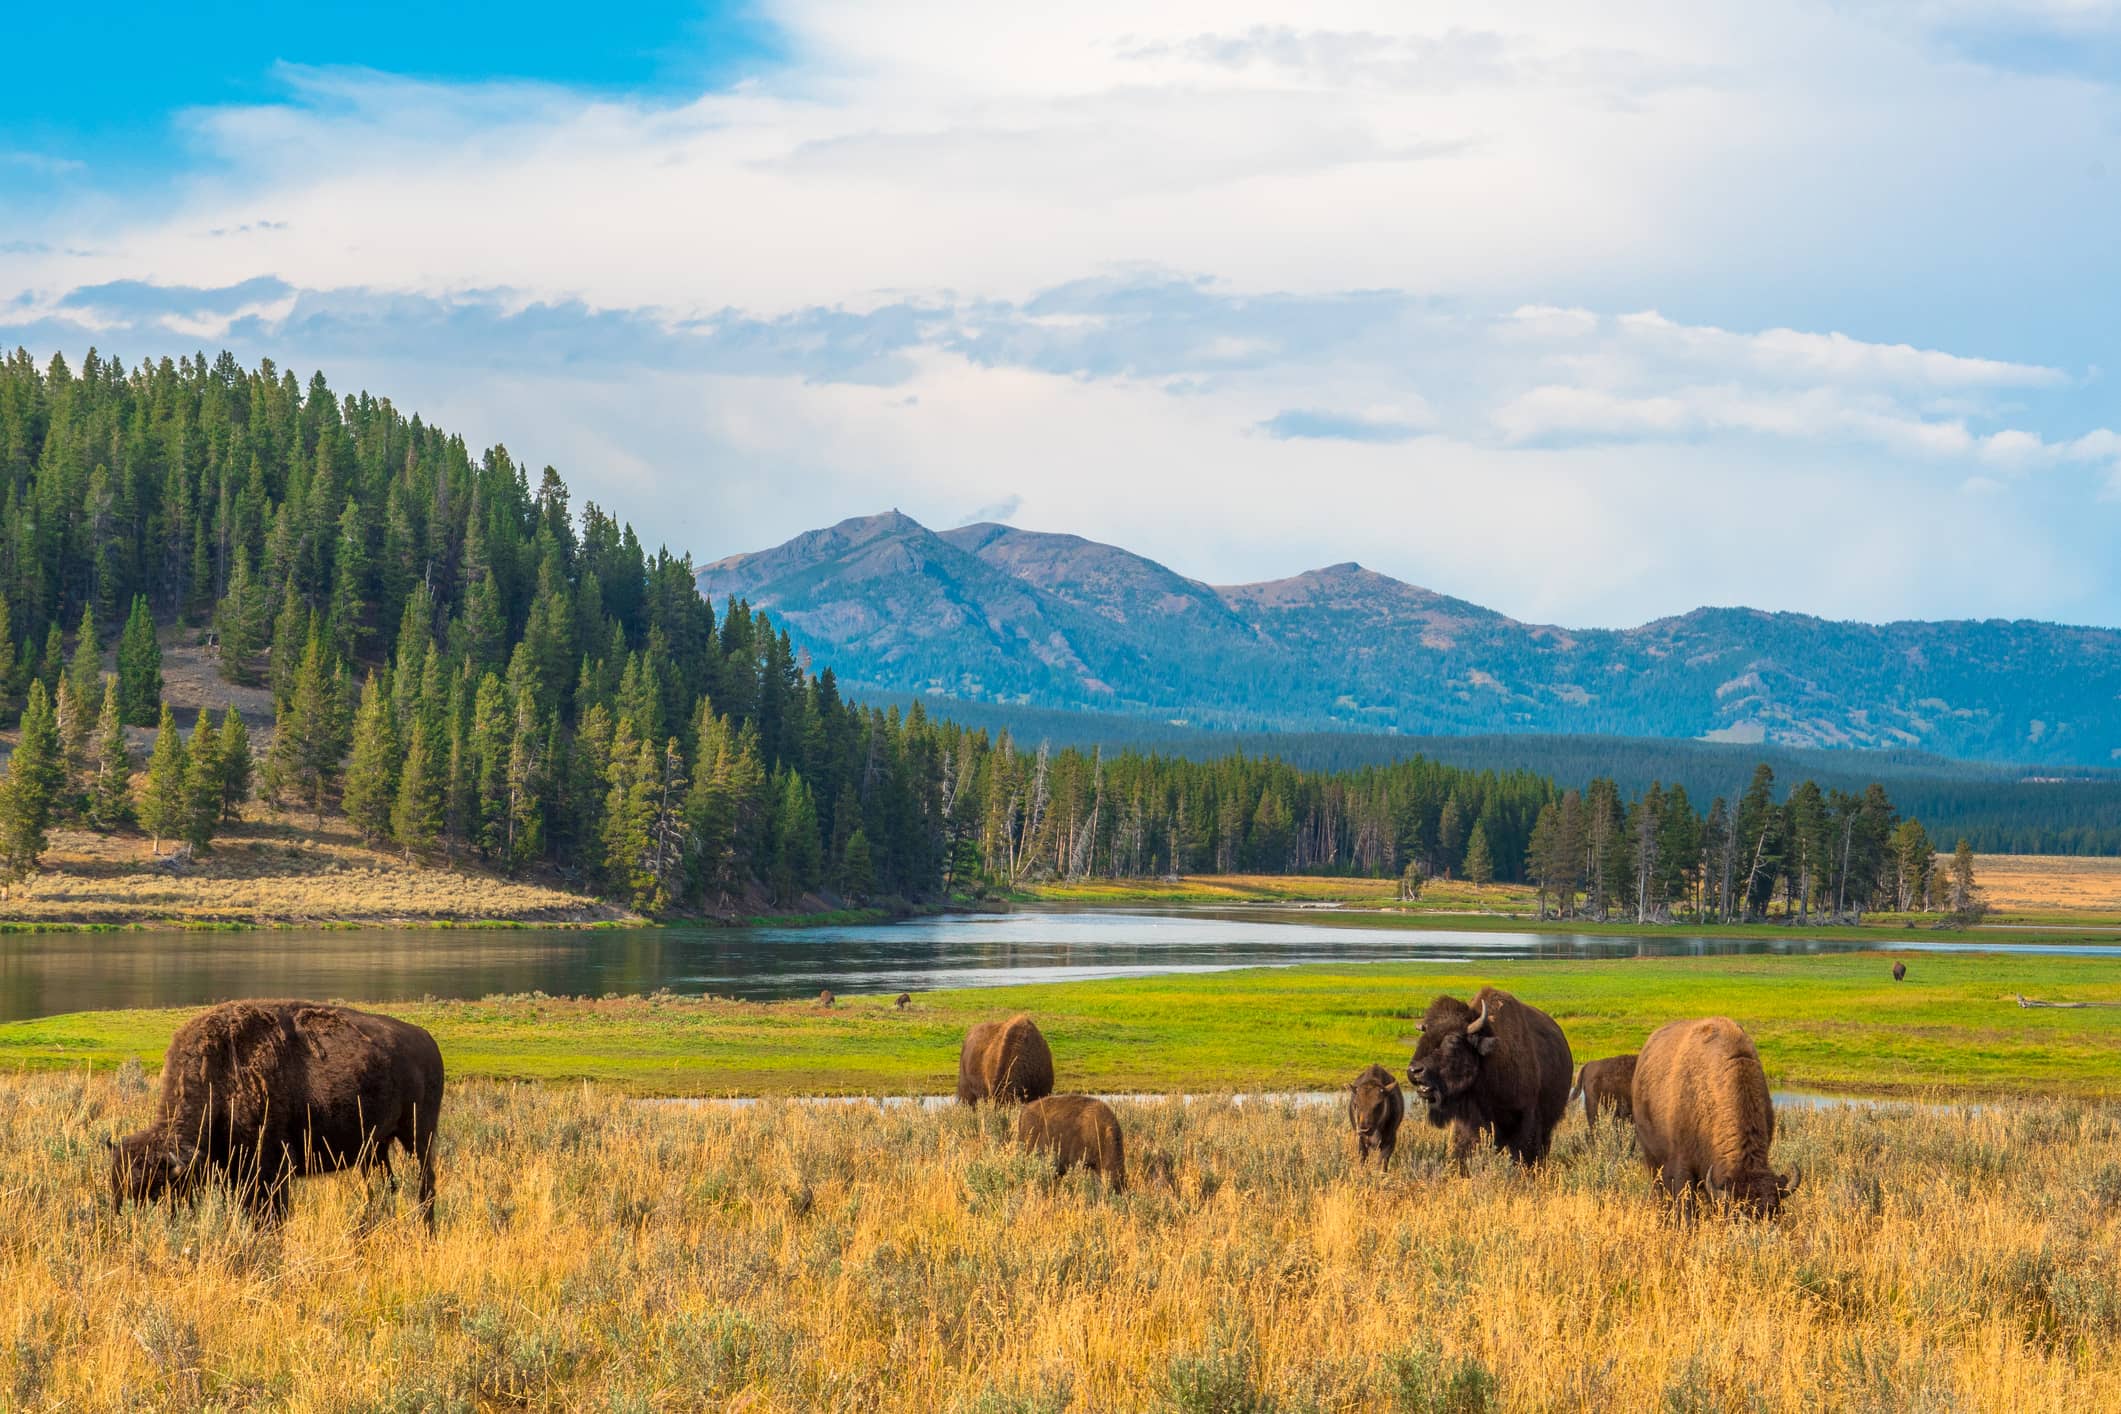 Wyoming landscape with bison